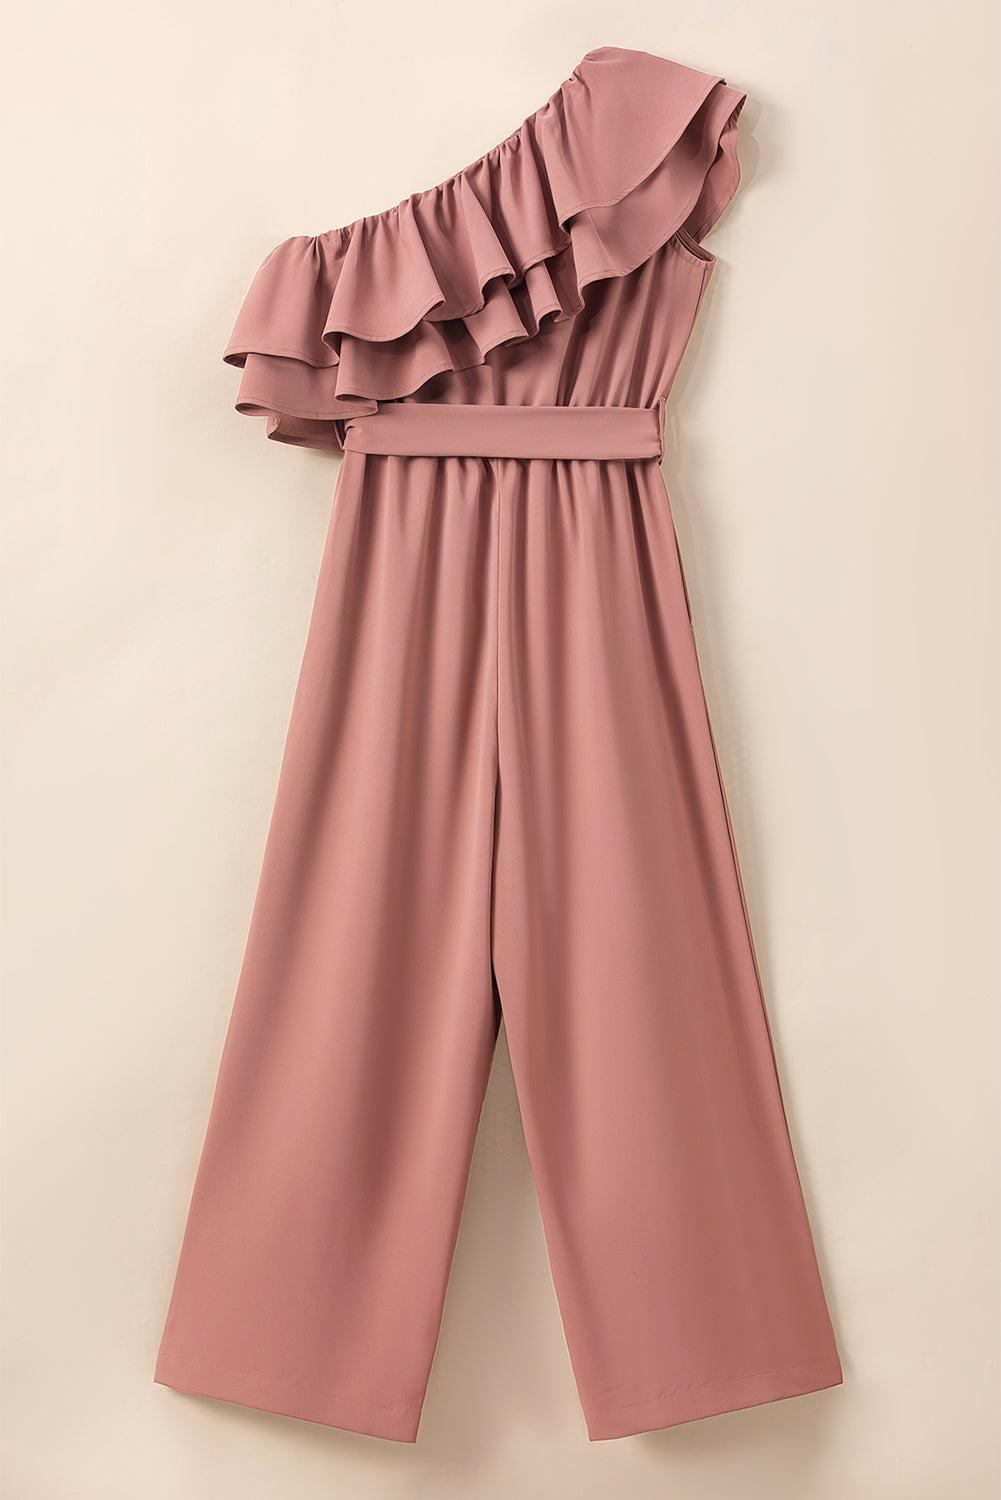 a pink jumpsuit hanging on a wall